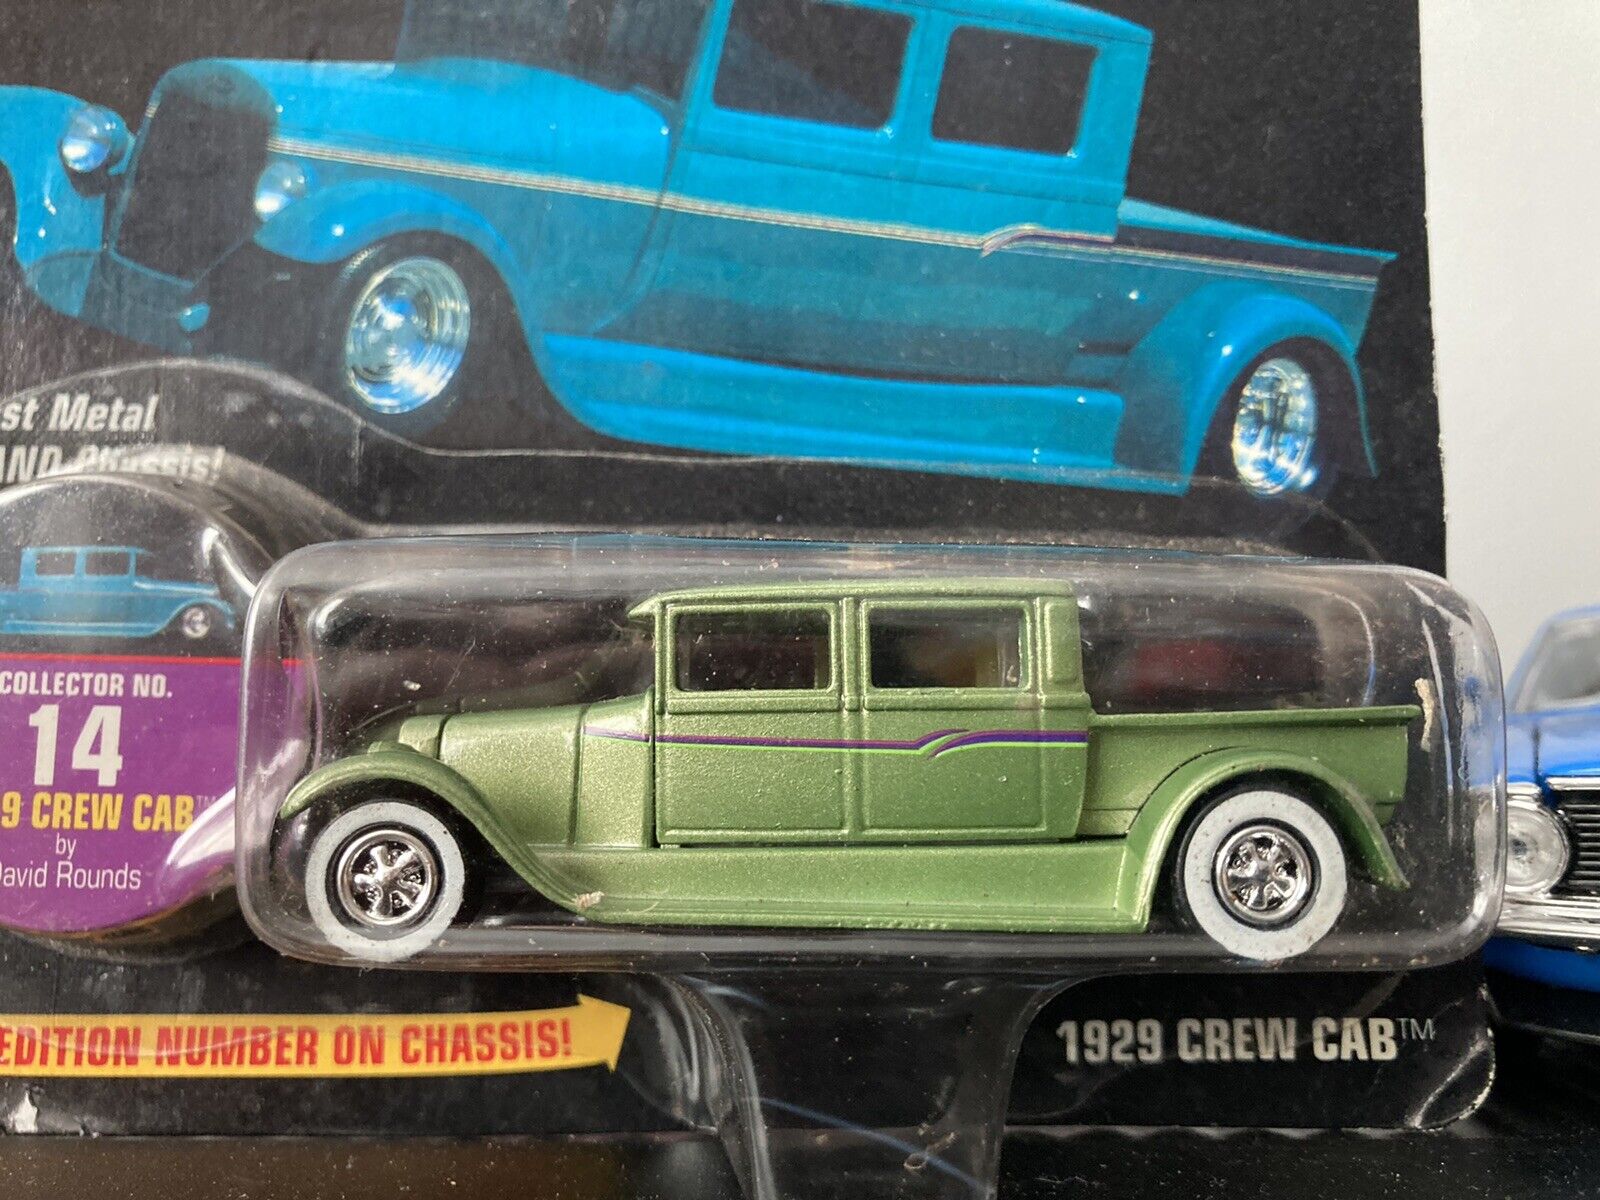 1929 Crew Cab 1:64 scale diecast Hot Rod by Johnny Lightning 